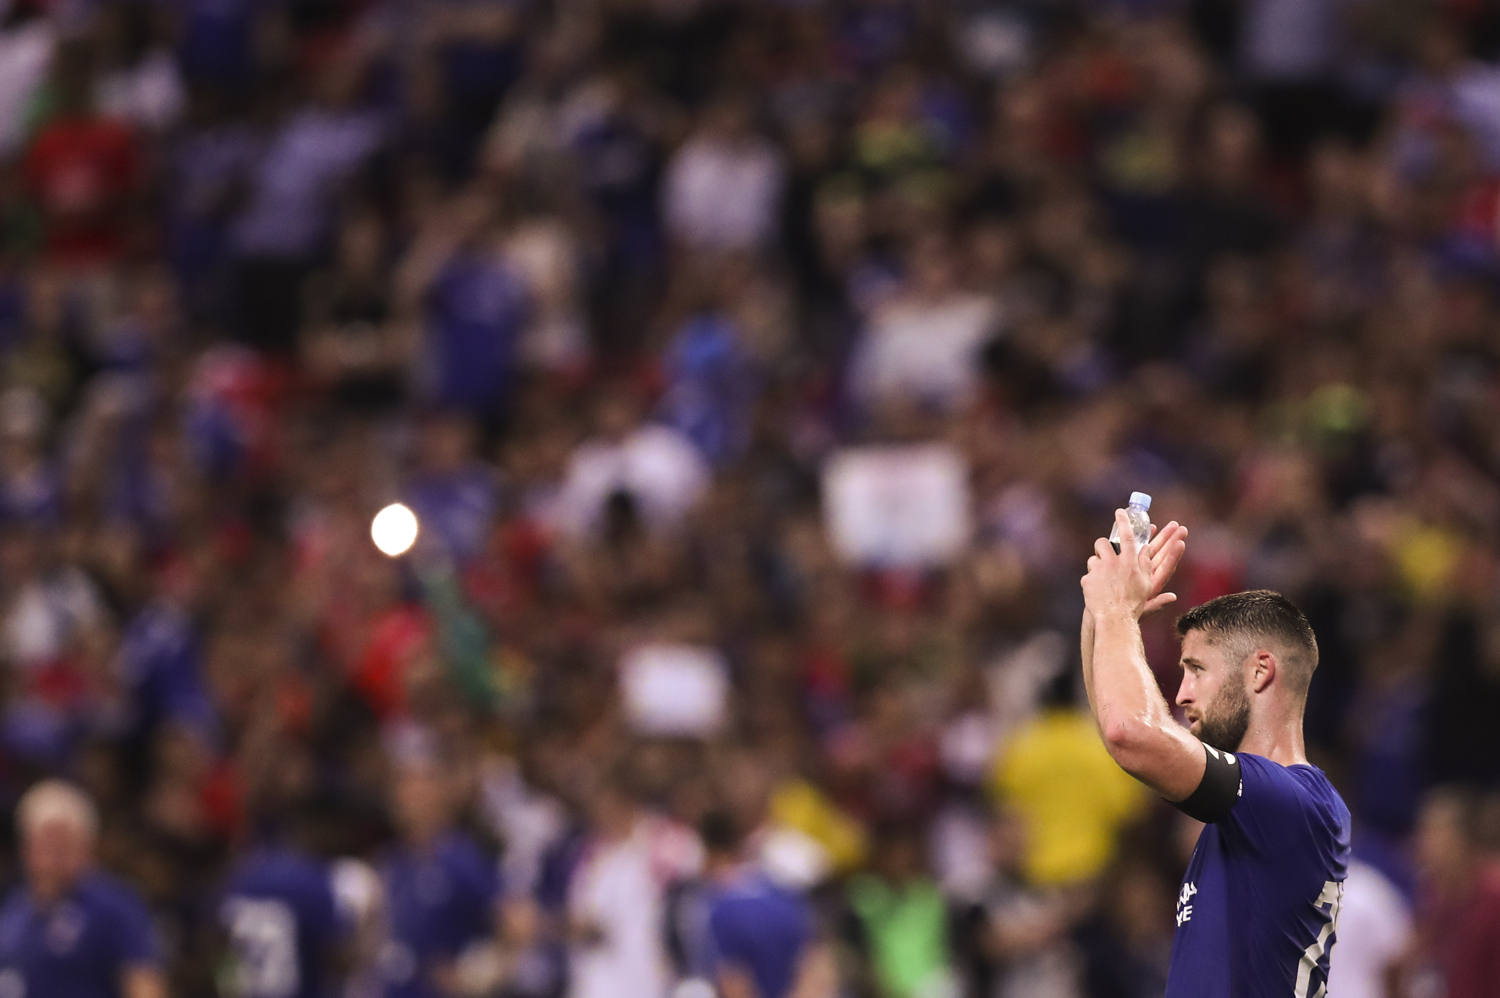  Soccer Football - Chelsea vs Bayern Munich - International Champions Cup - Singapore - July 25, 2017 Chelsea's Gary Cahill applauds fans after the match REUTERS/Yong Teck Lim 